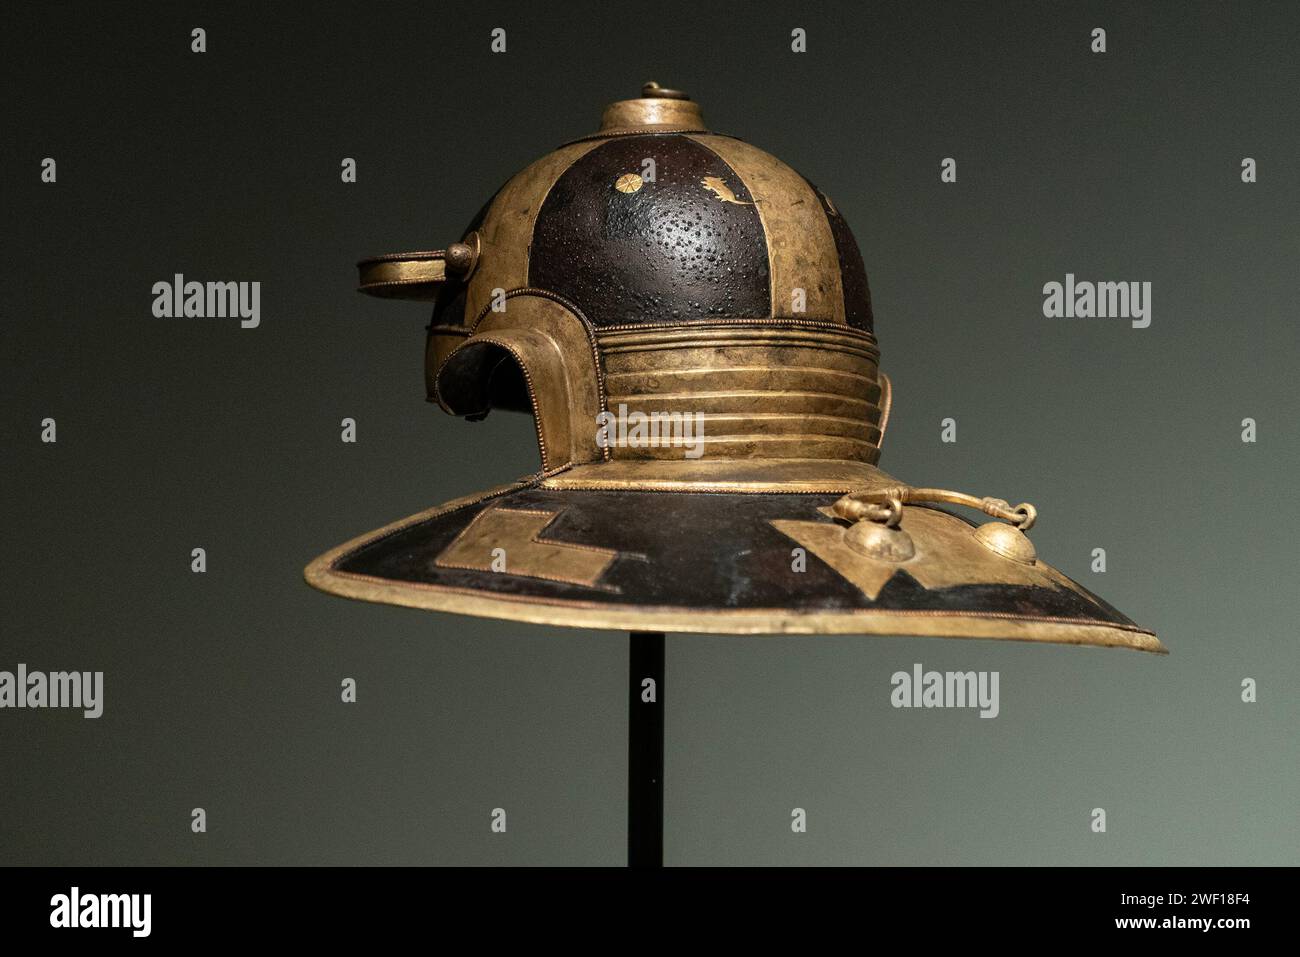 New York, United States. 26th Jan, 2024. Roman Iron, Brass and Copper Helmet from 2nd century A.D. from Mougins Museum of Classical Art Collection seen during press preview ahead of auction at Christie's in New York. Helmet featured a small mouse on the top and punched inscription naming the helmet's owner, IVLI MANSVETI, probably to be read as Julius Mansuetus. (Photo by Lev Radin/Pacific Press) Credit: Pacific Press Media Production Corp./Alamy Live News Stock Photo